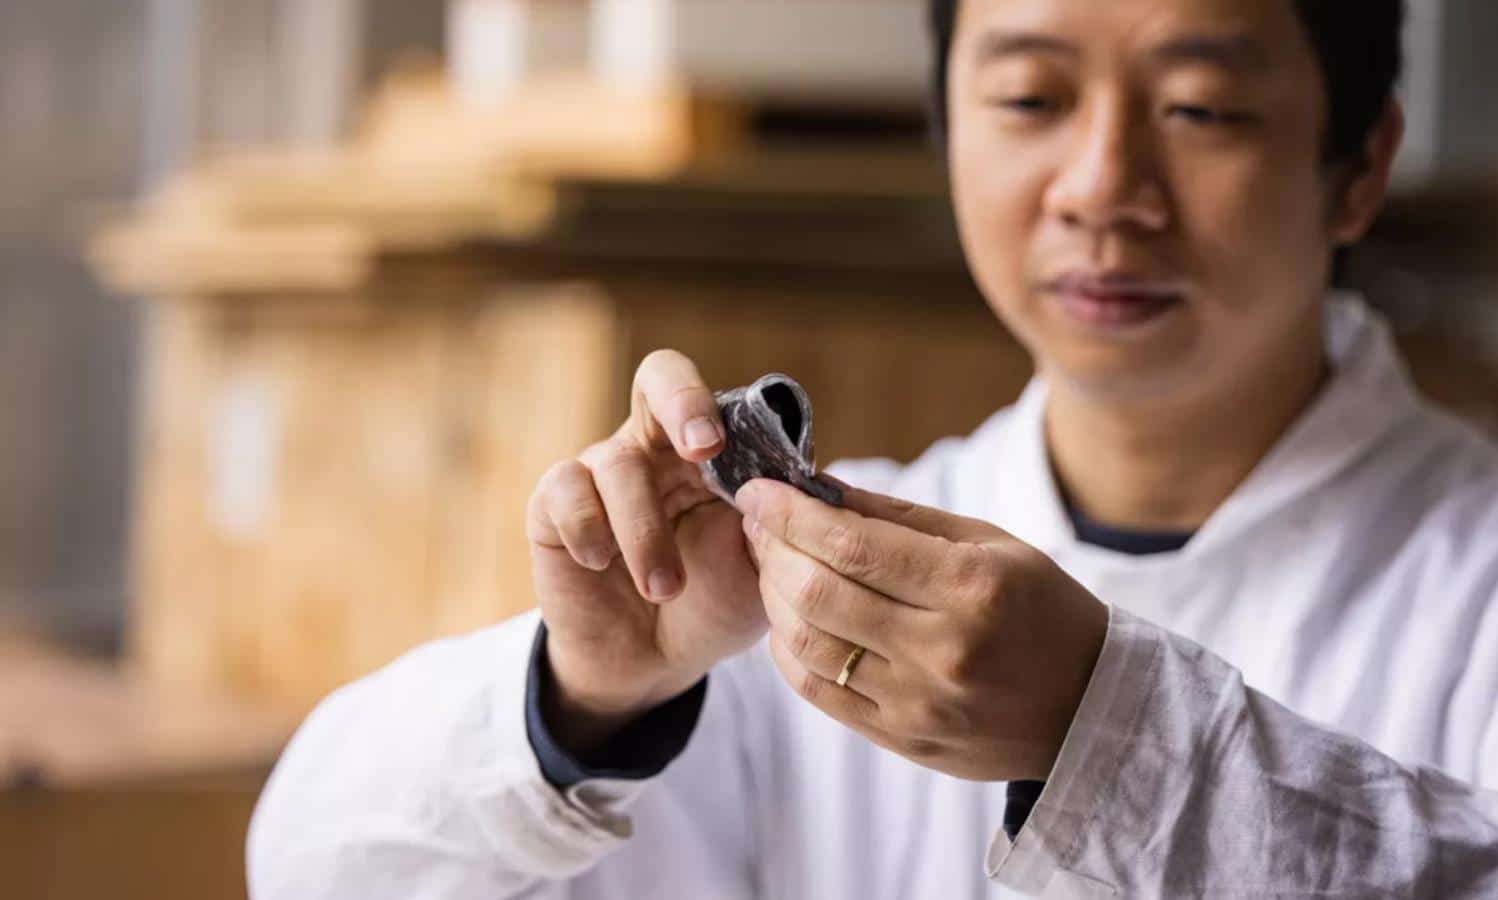 A washable flexible battery is the next step to smart clothing